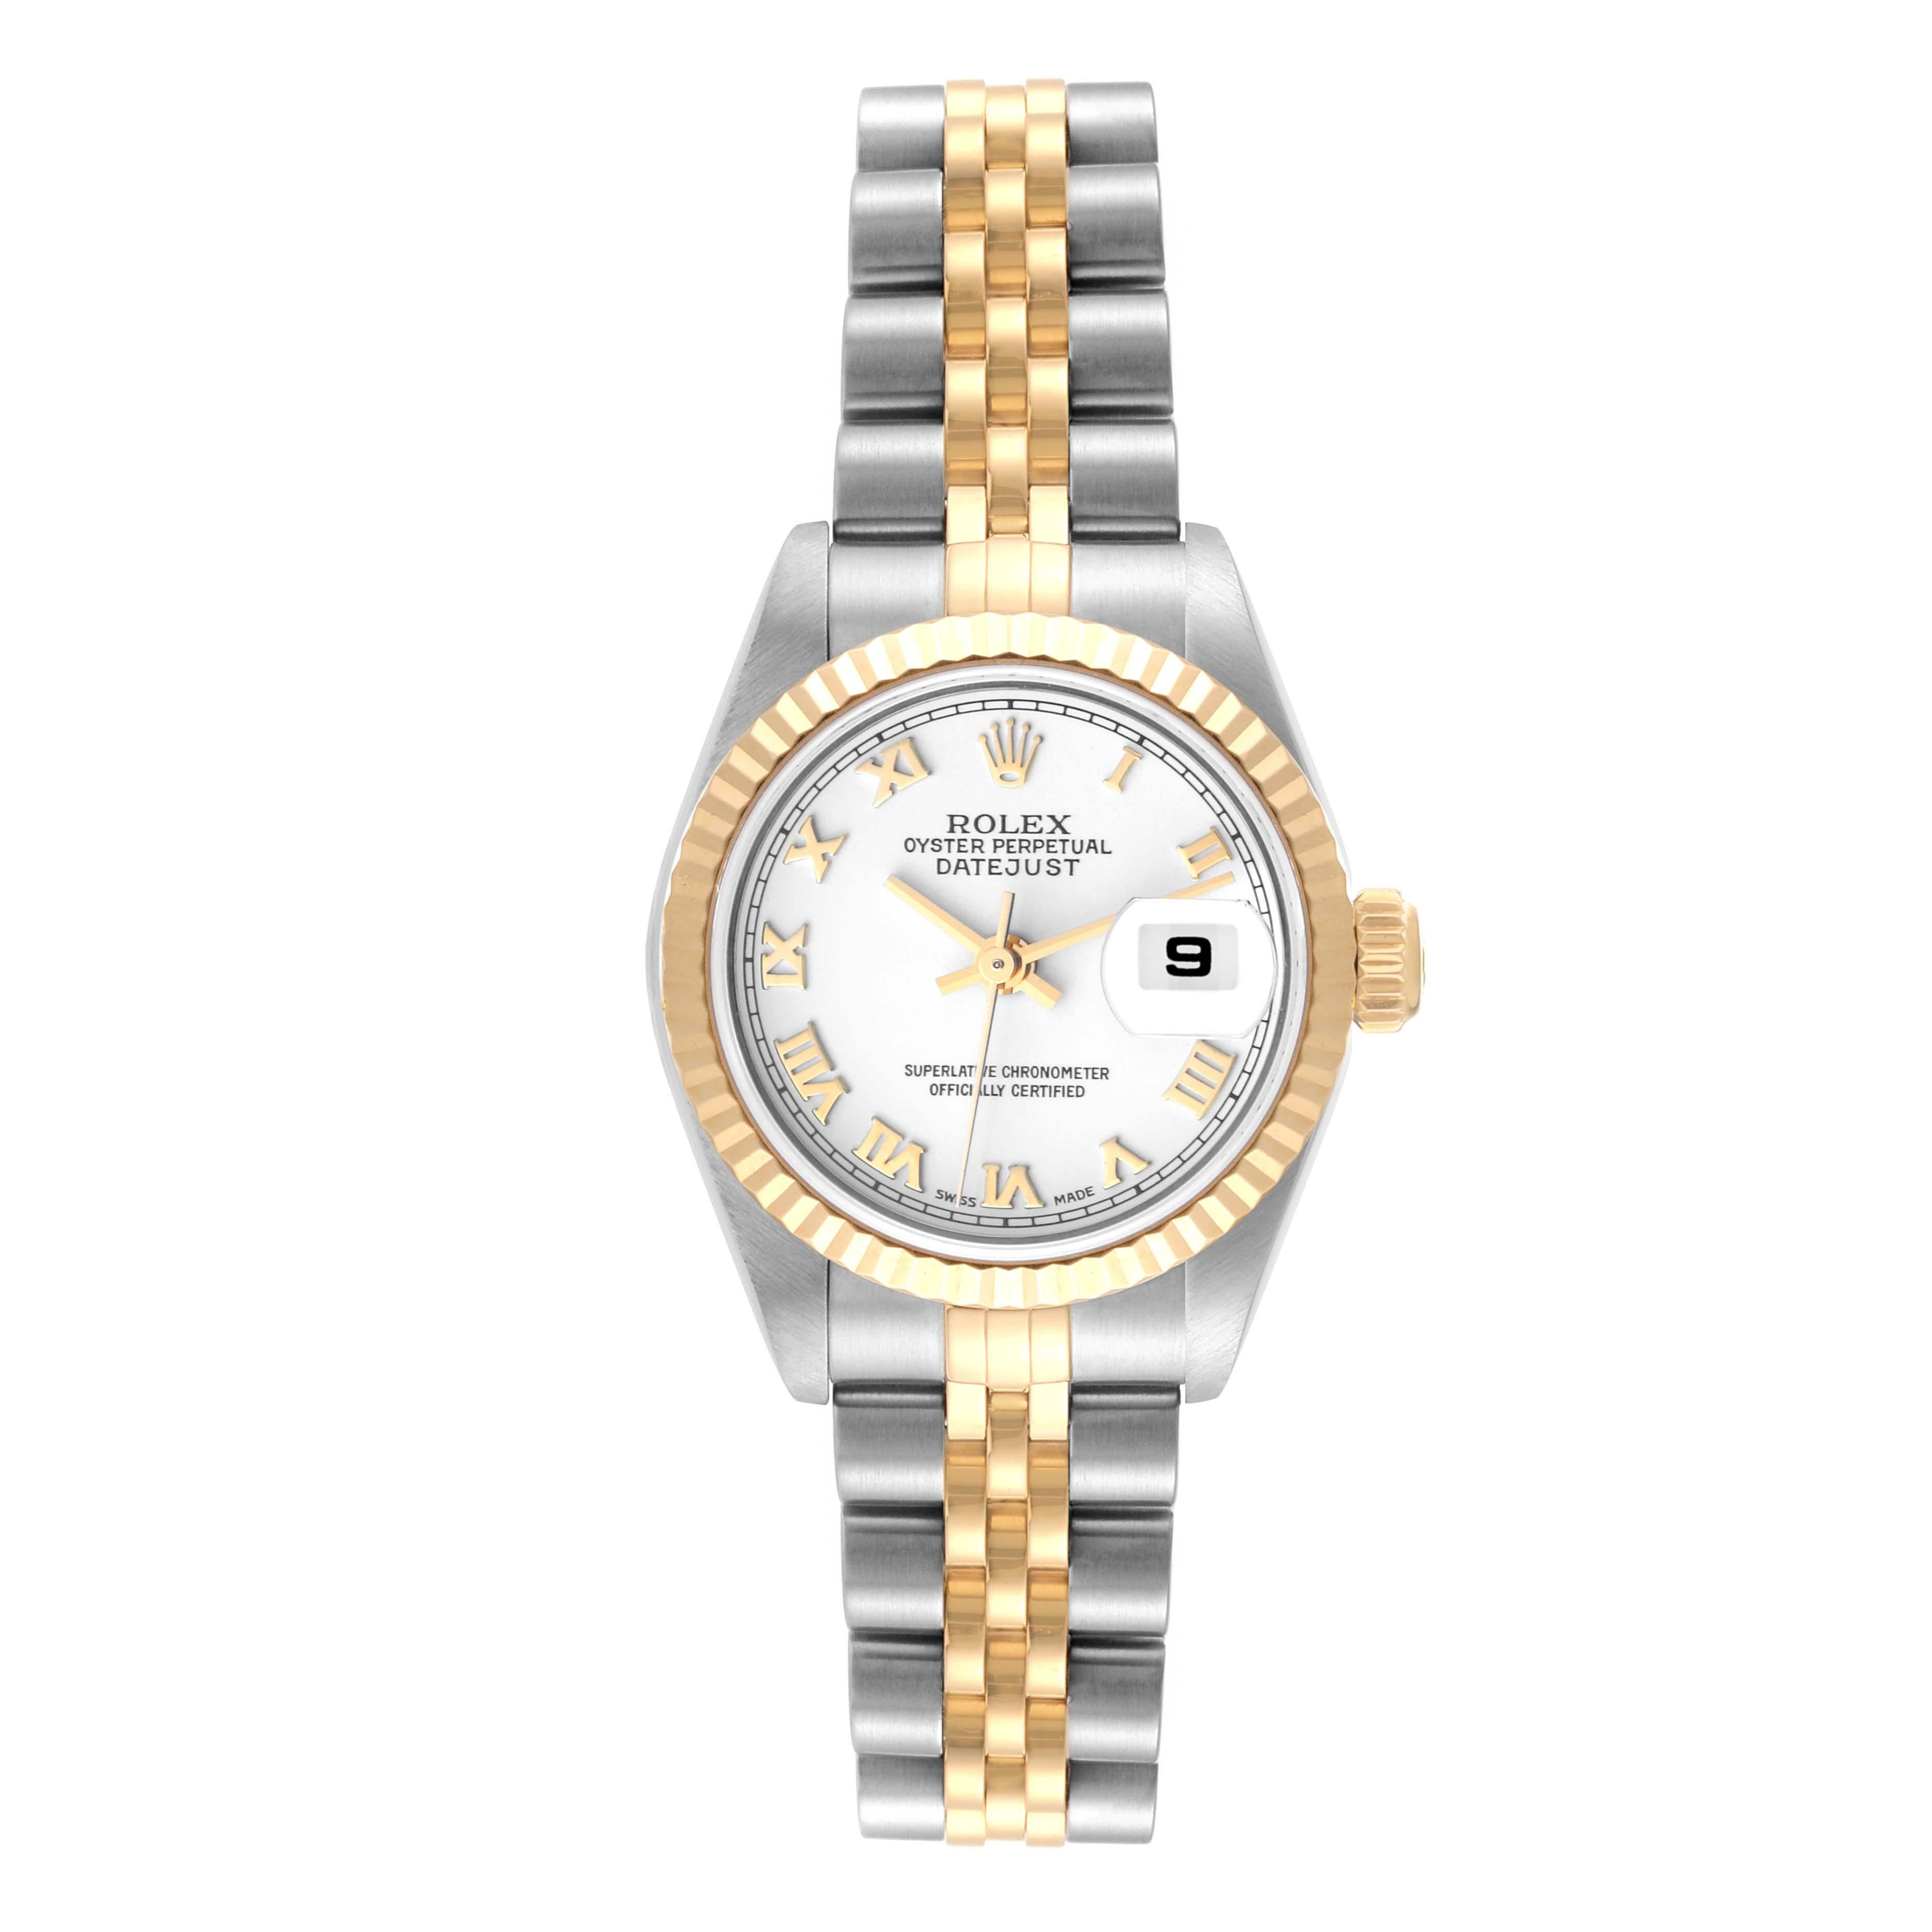 Rolex Datejust Steel Yellow Gold White Dial Ladies Watch 79173. Officially certified chronometer automatic self-winding movement. Stainless steel oyster case 26 mm in diameter. Rolex logo on an 18K yellow gold crown. 18k yellow gold fluted bezel.